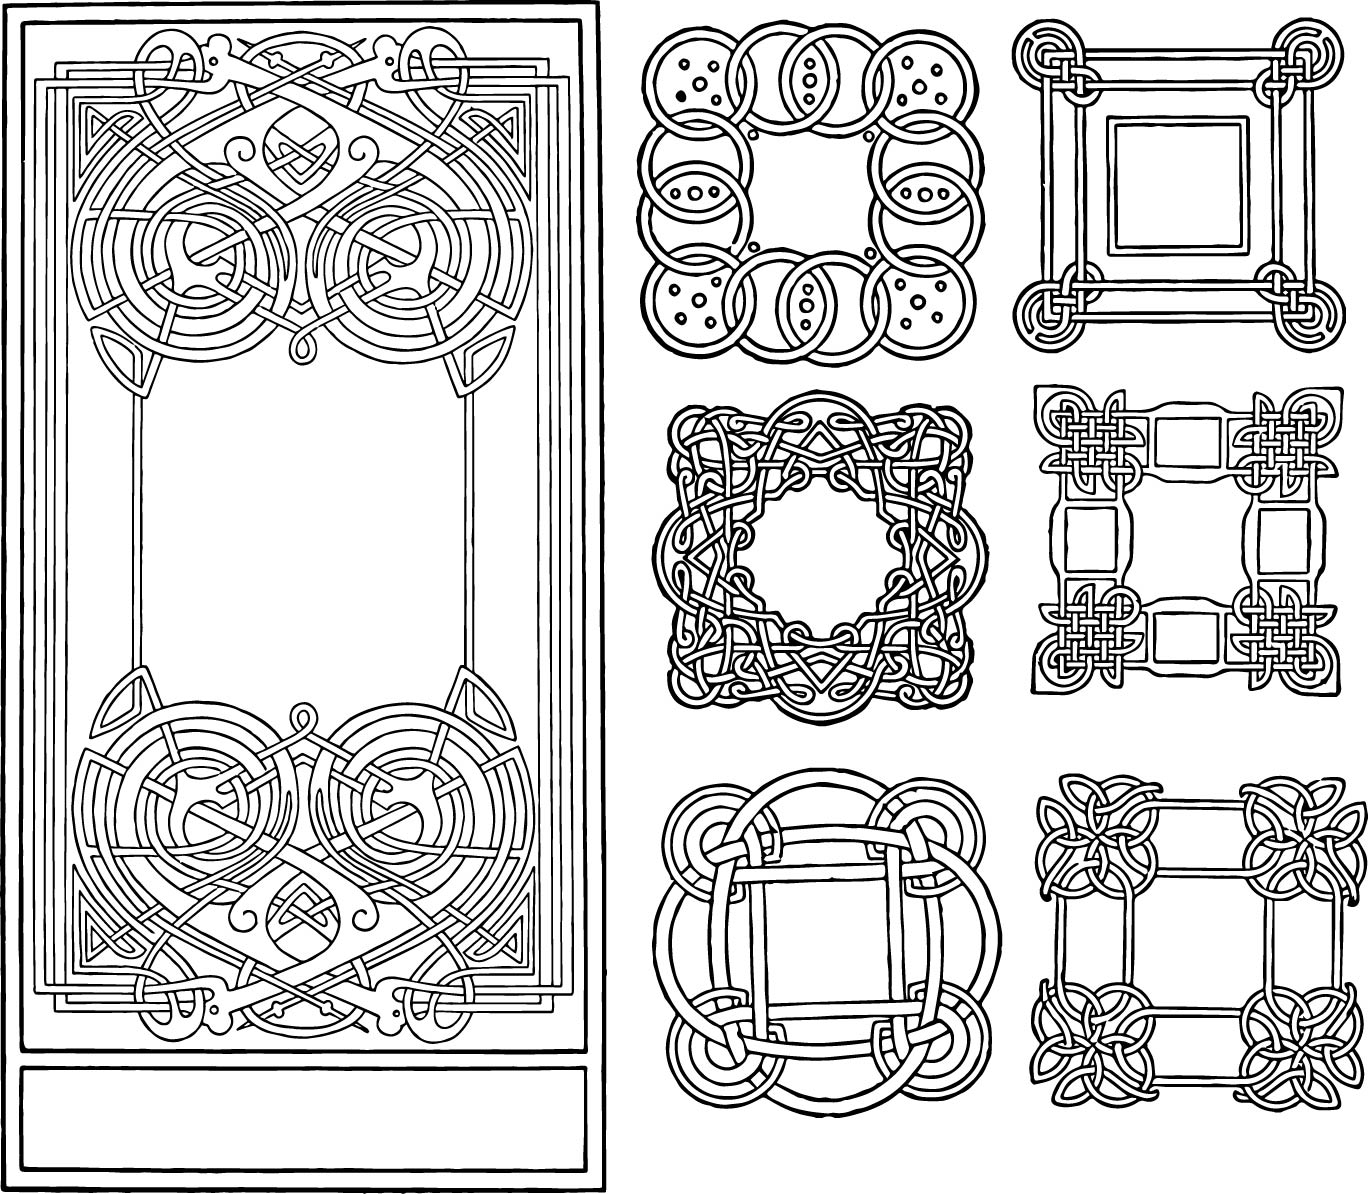 Free celtic knotwork free clipart image oh so nifty vintage graphics